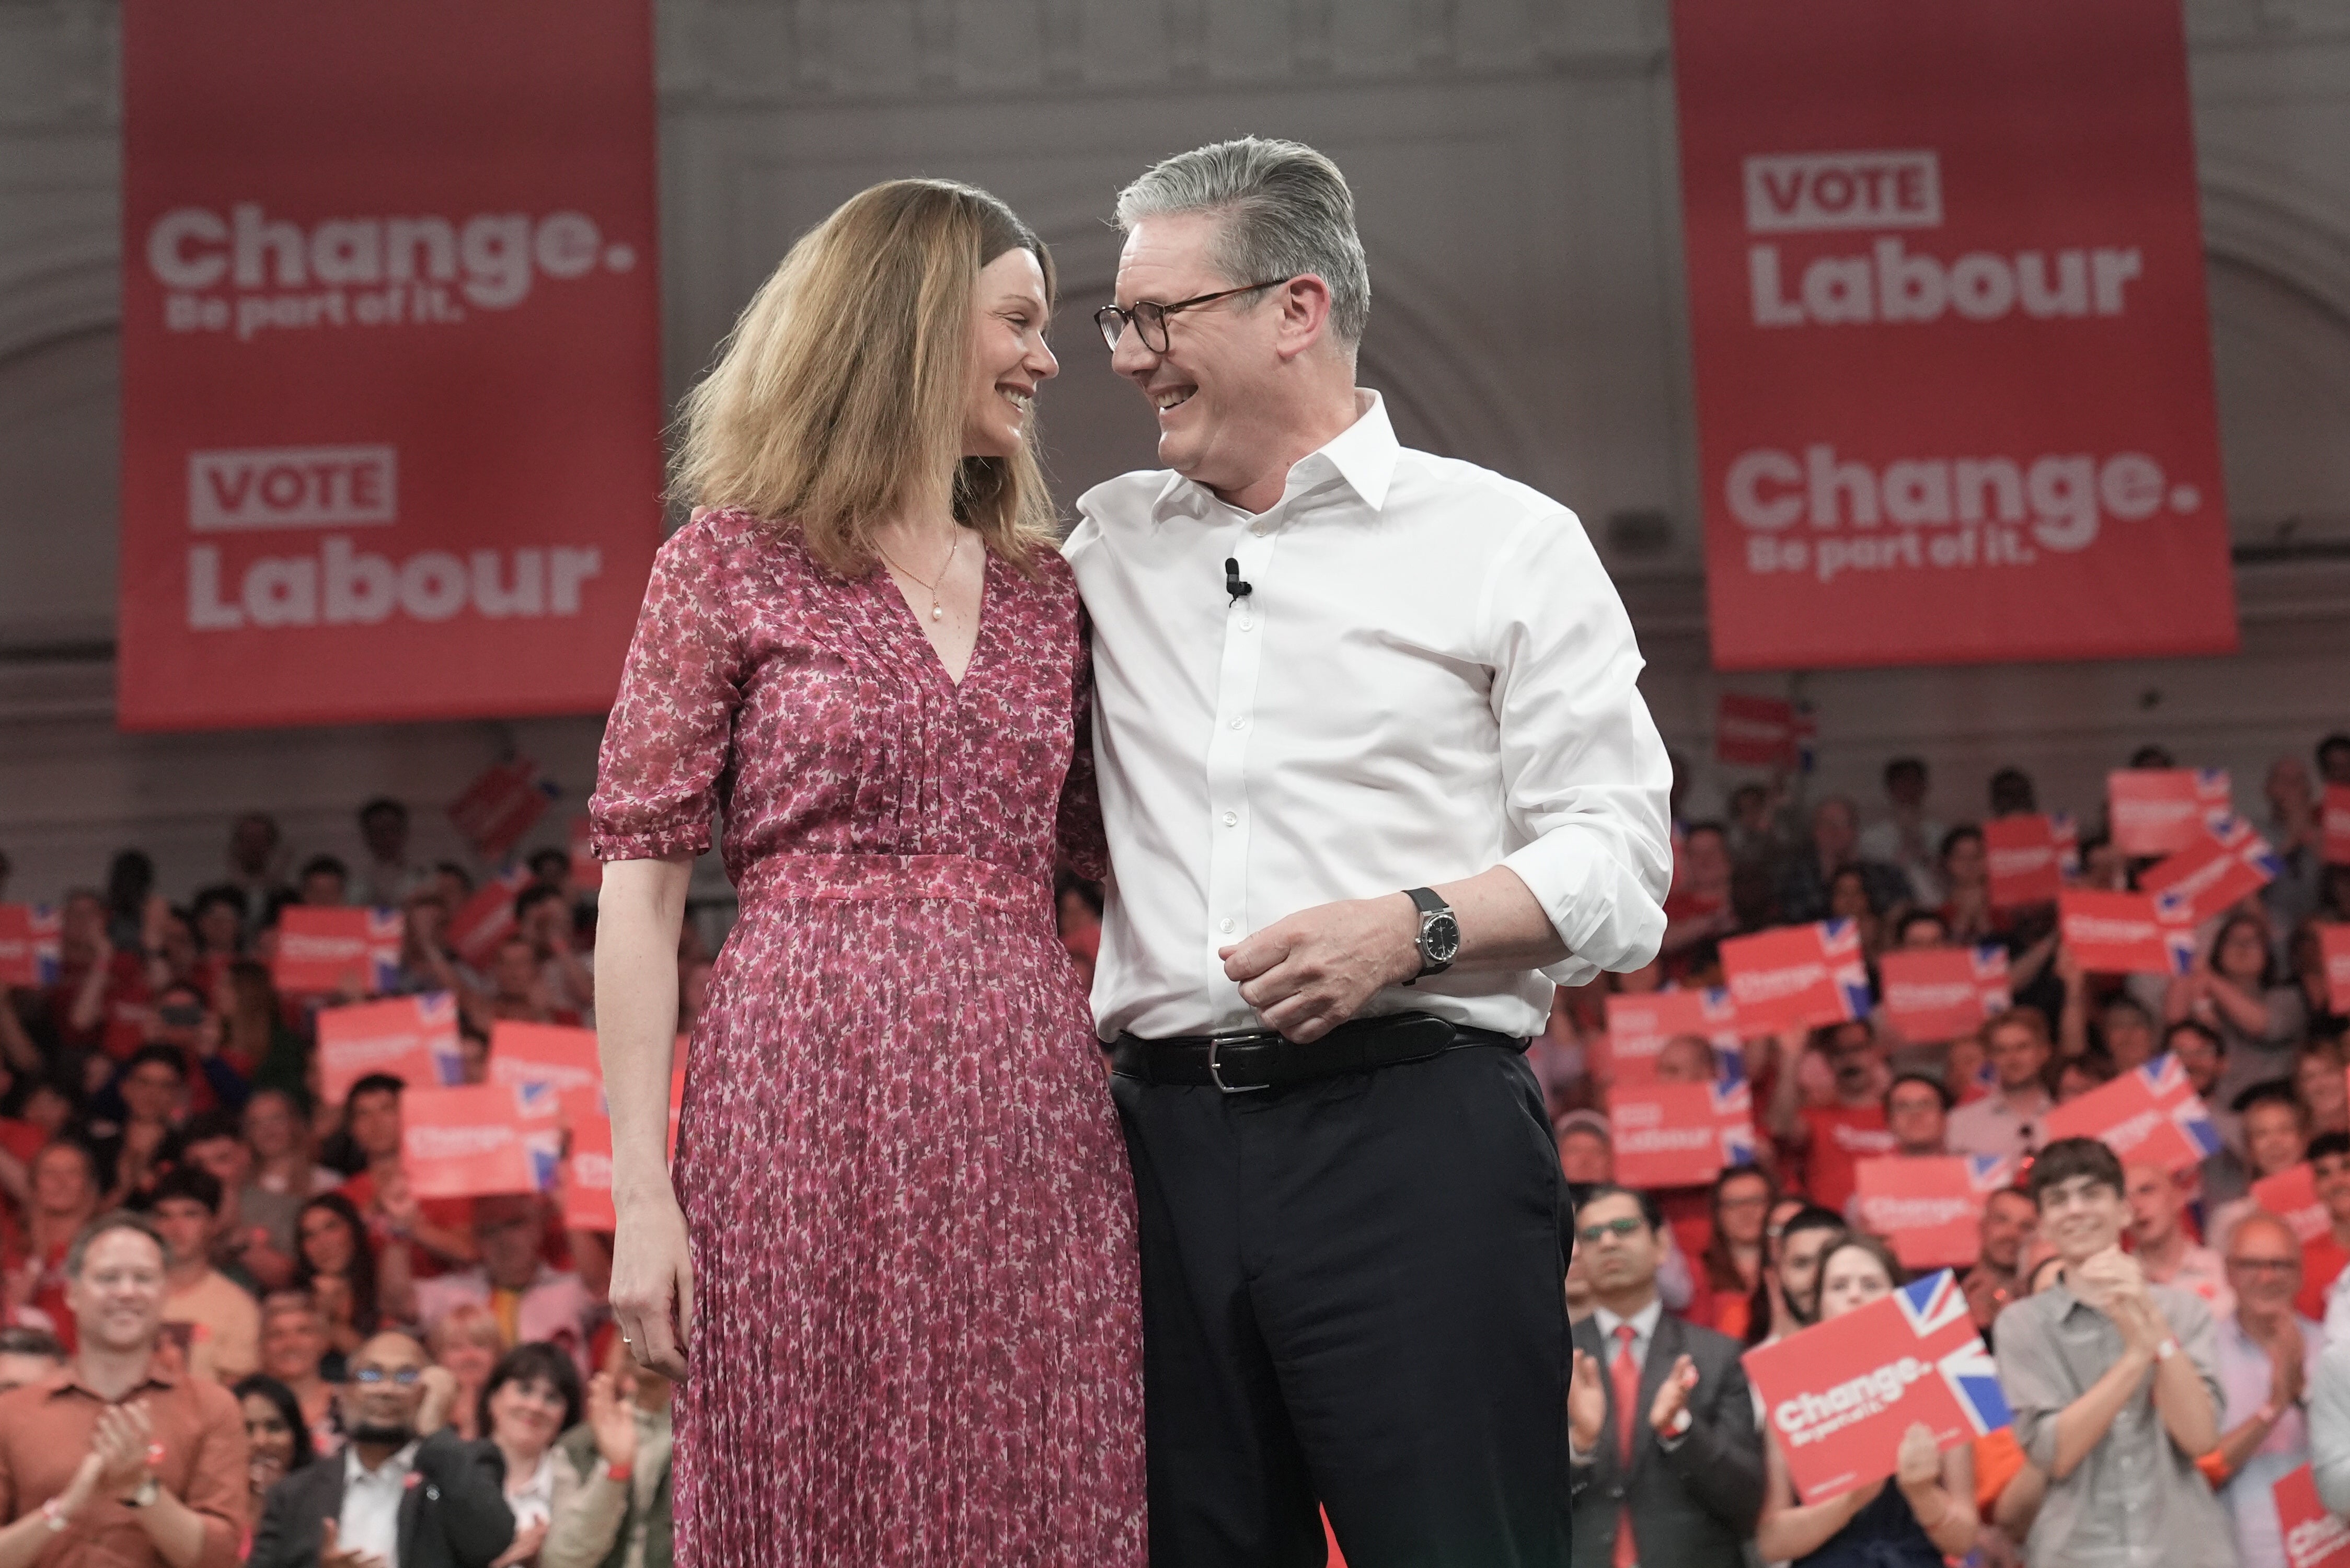 Labour leader Sir Keir Starmer, with his wife Victoria, on stage after he spoke at a major campaign event at the Royal Horticultural Halls in central London (Stefan Rousseau/PA)